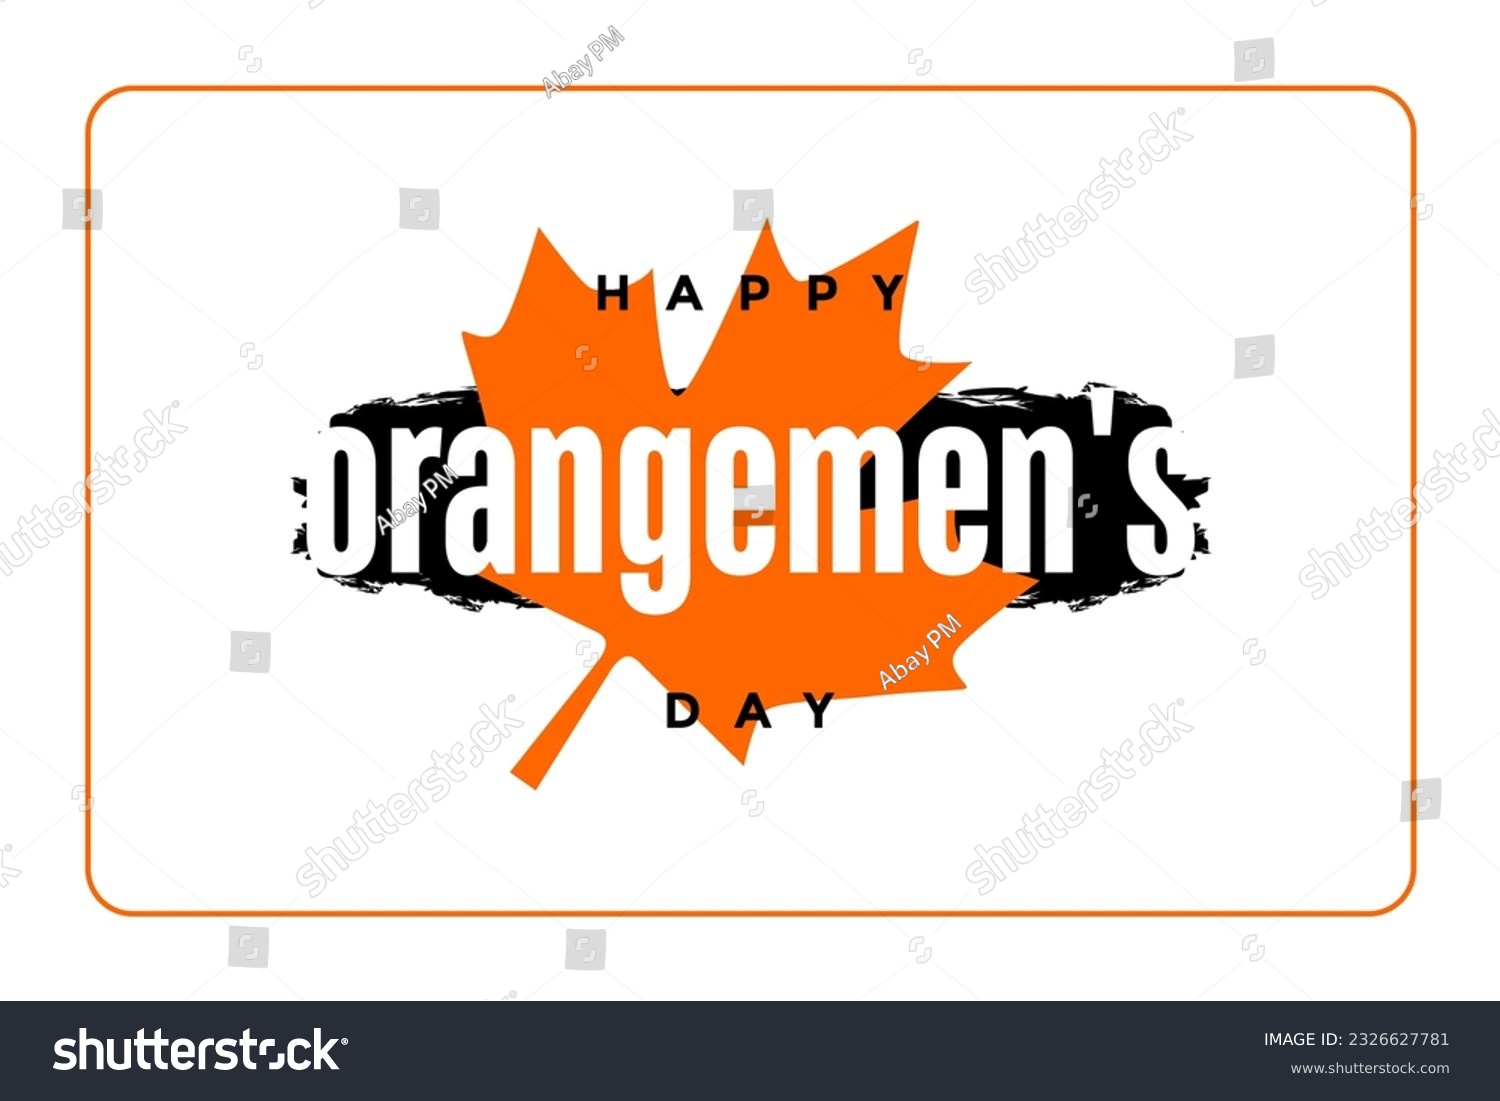 SVG of orangemen's day canada, july 12, background template Holiday concept svg